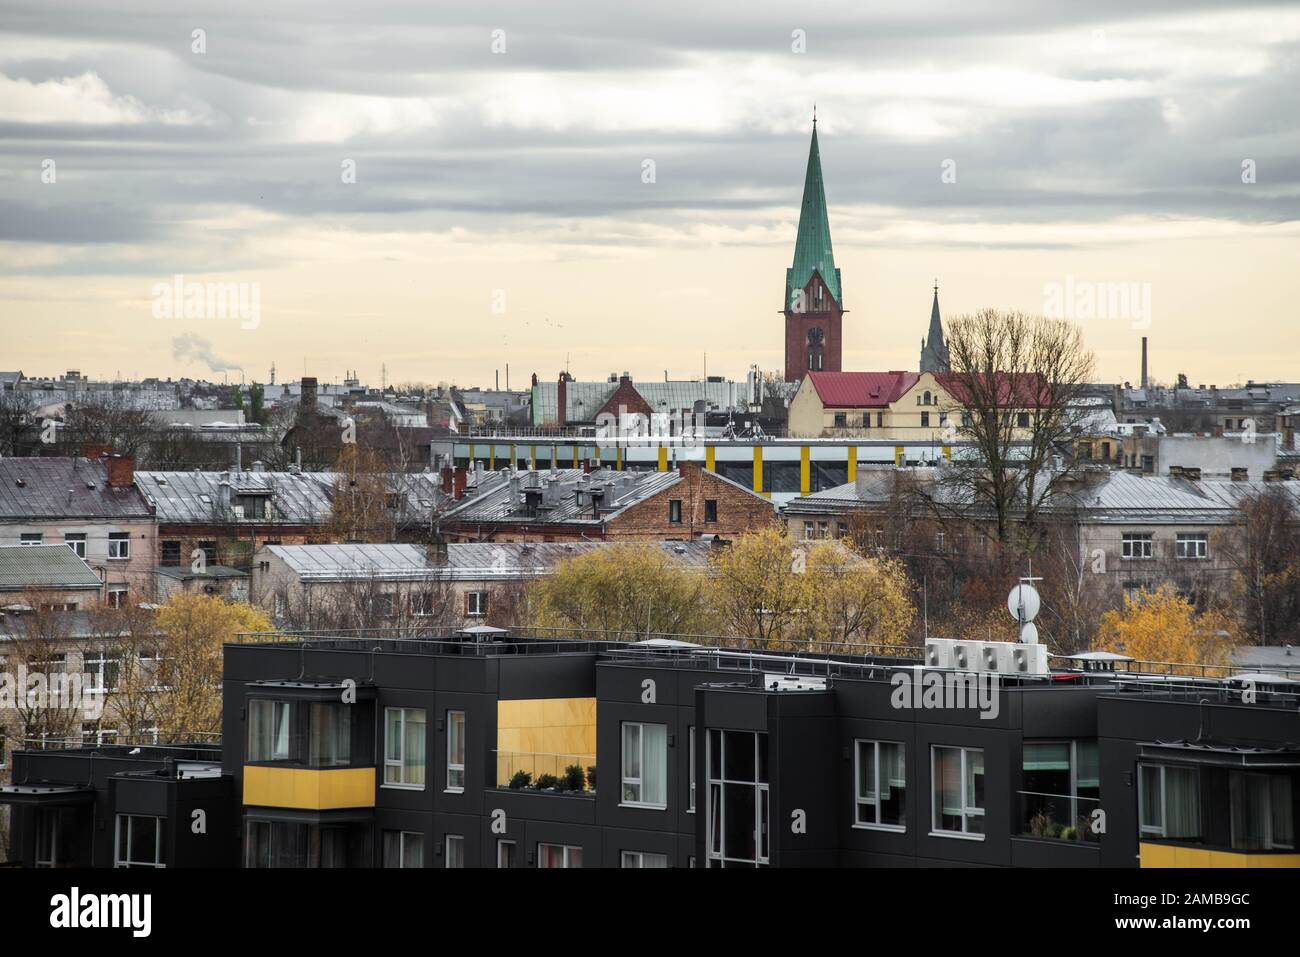 Cityscape in cloudy day. View of roofs. Catolic church bell tower. Stock Photo